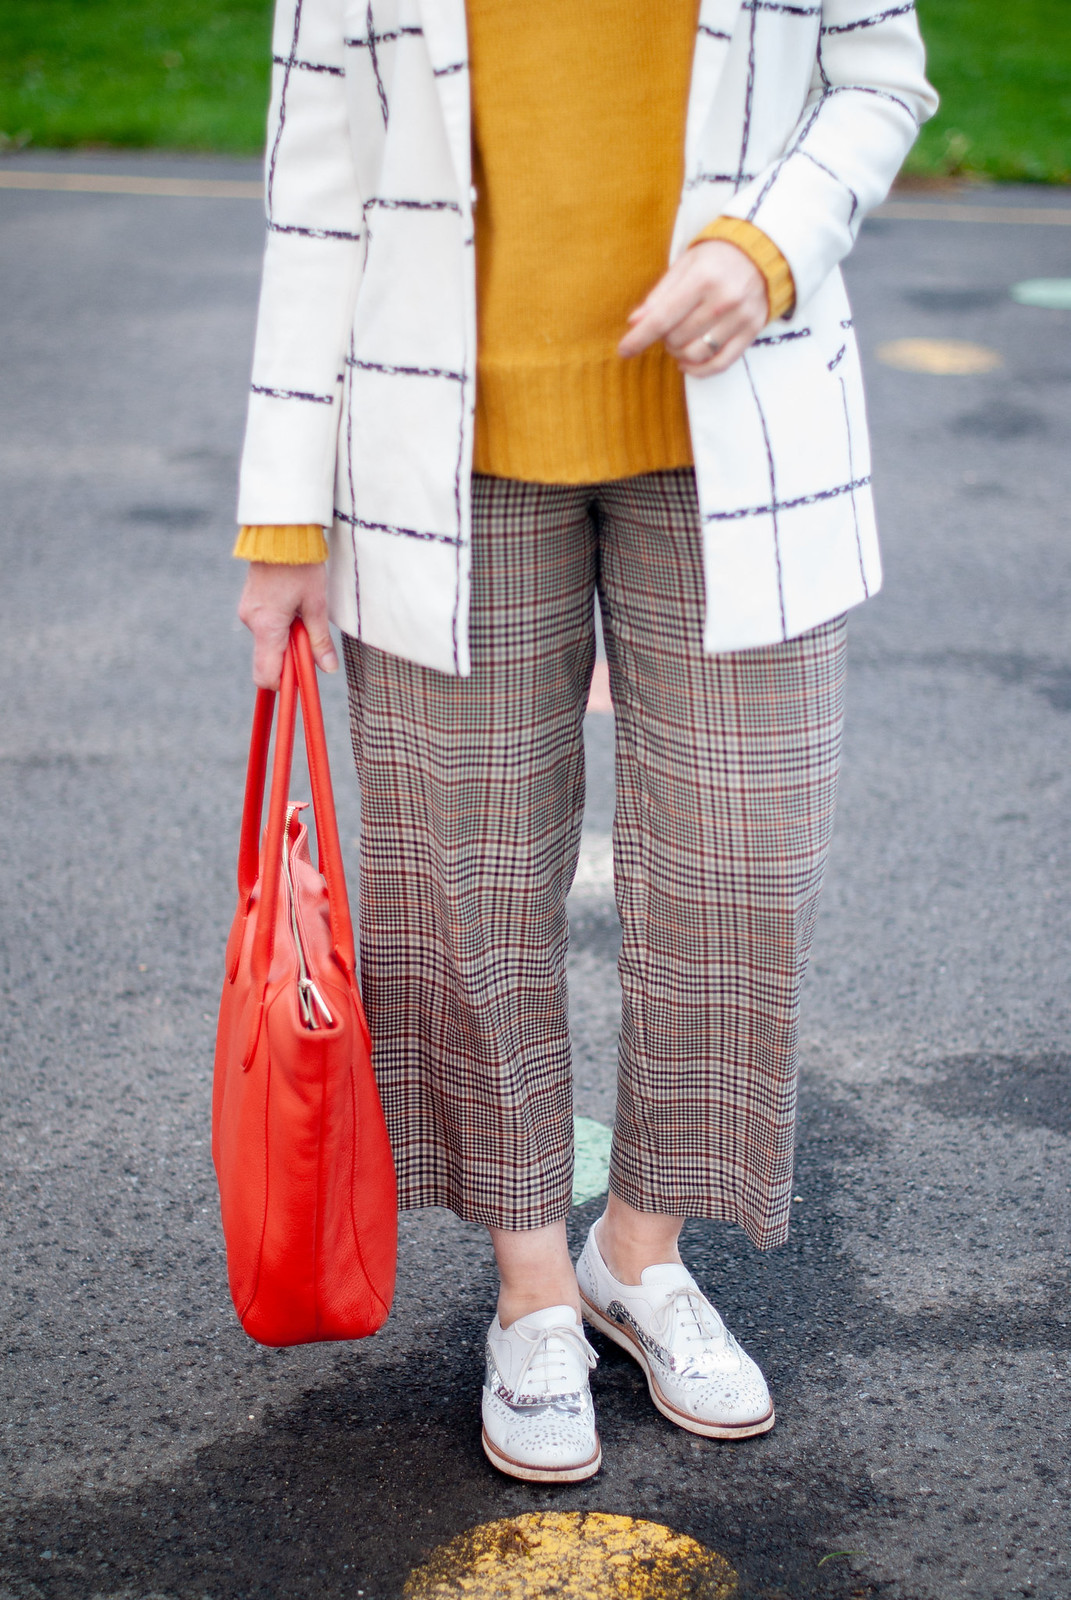 Pattern Mixed Checks With Orange and Yellow in Autumn, Over 40 Style | Not Dressed As Lamb